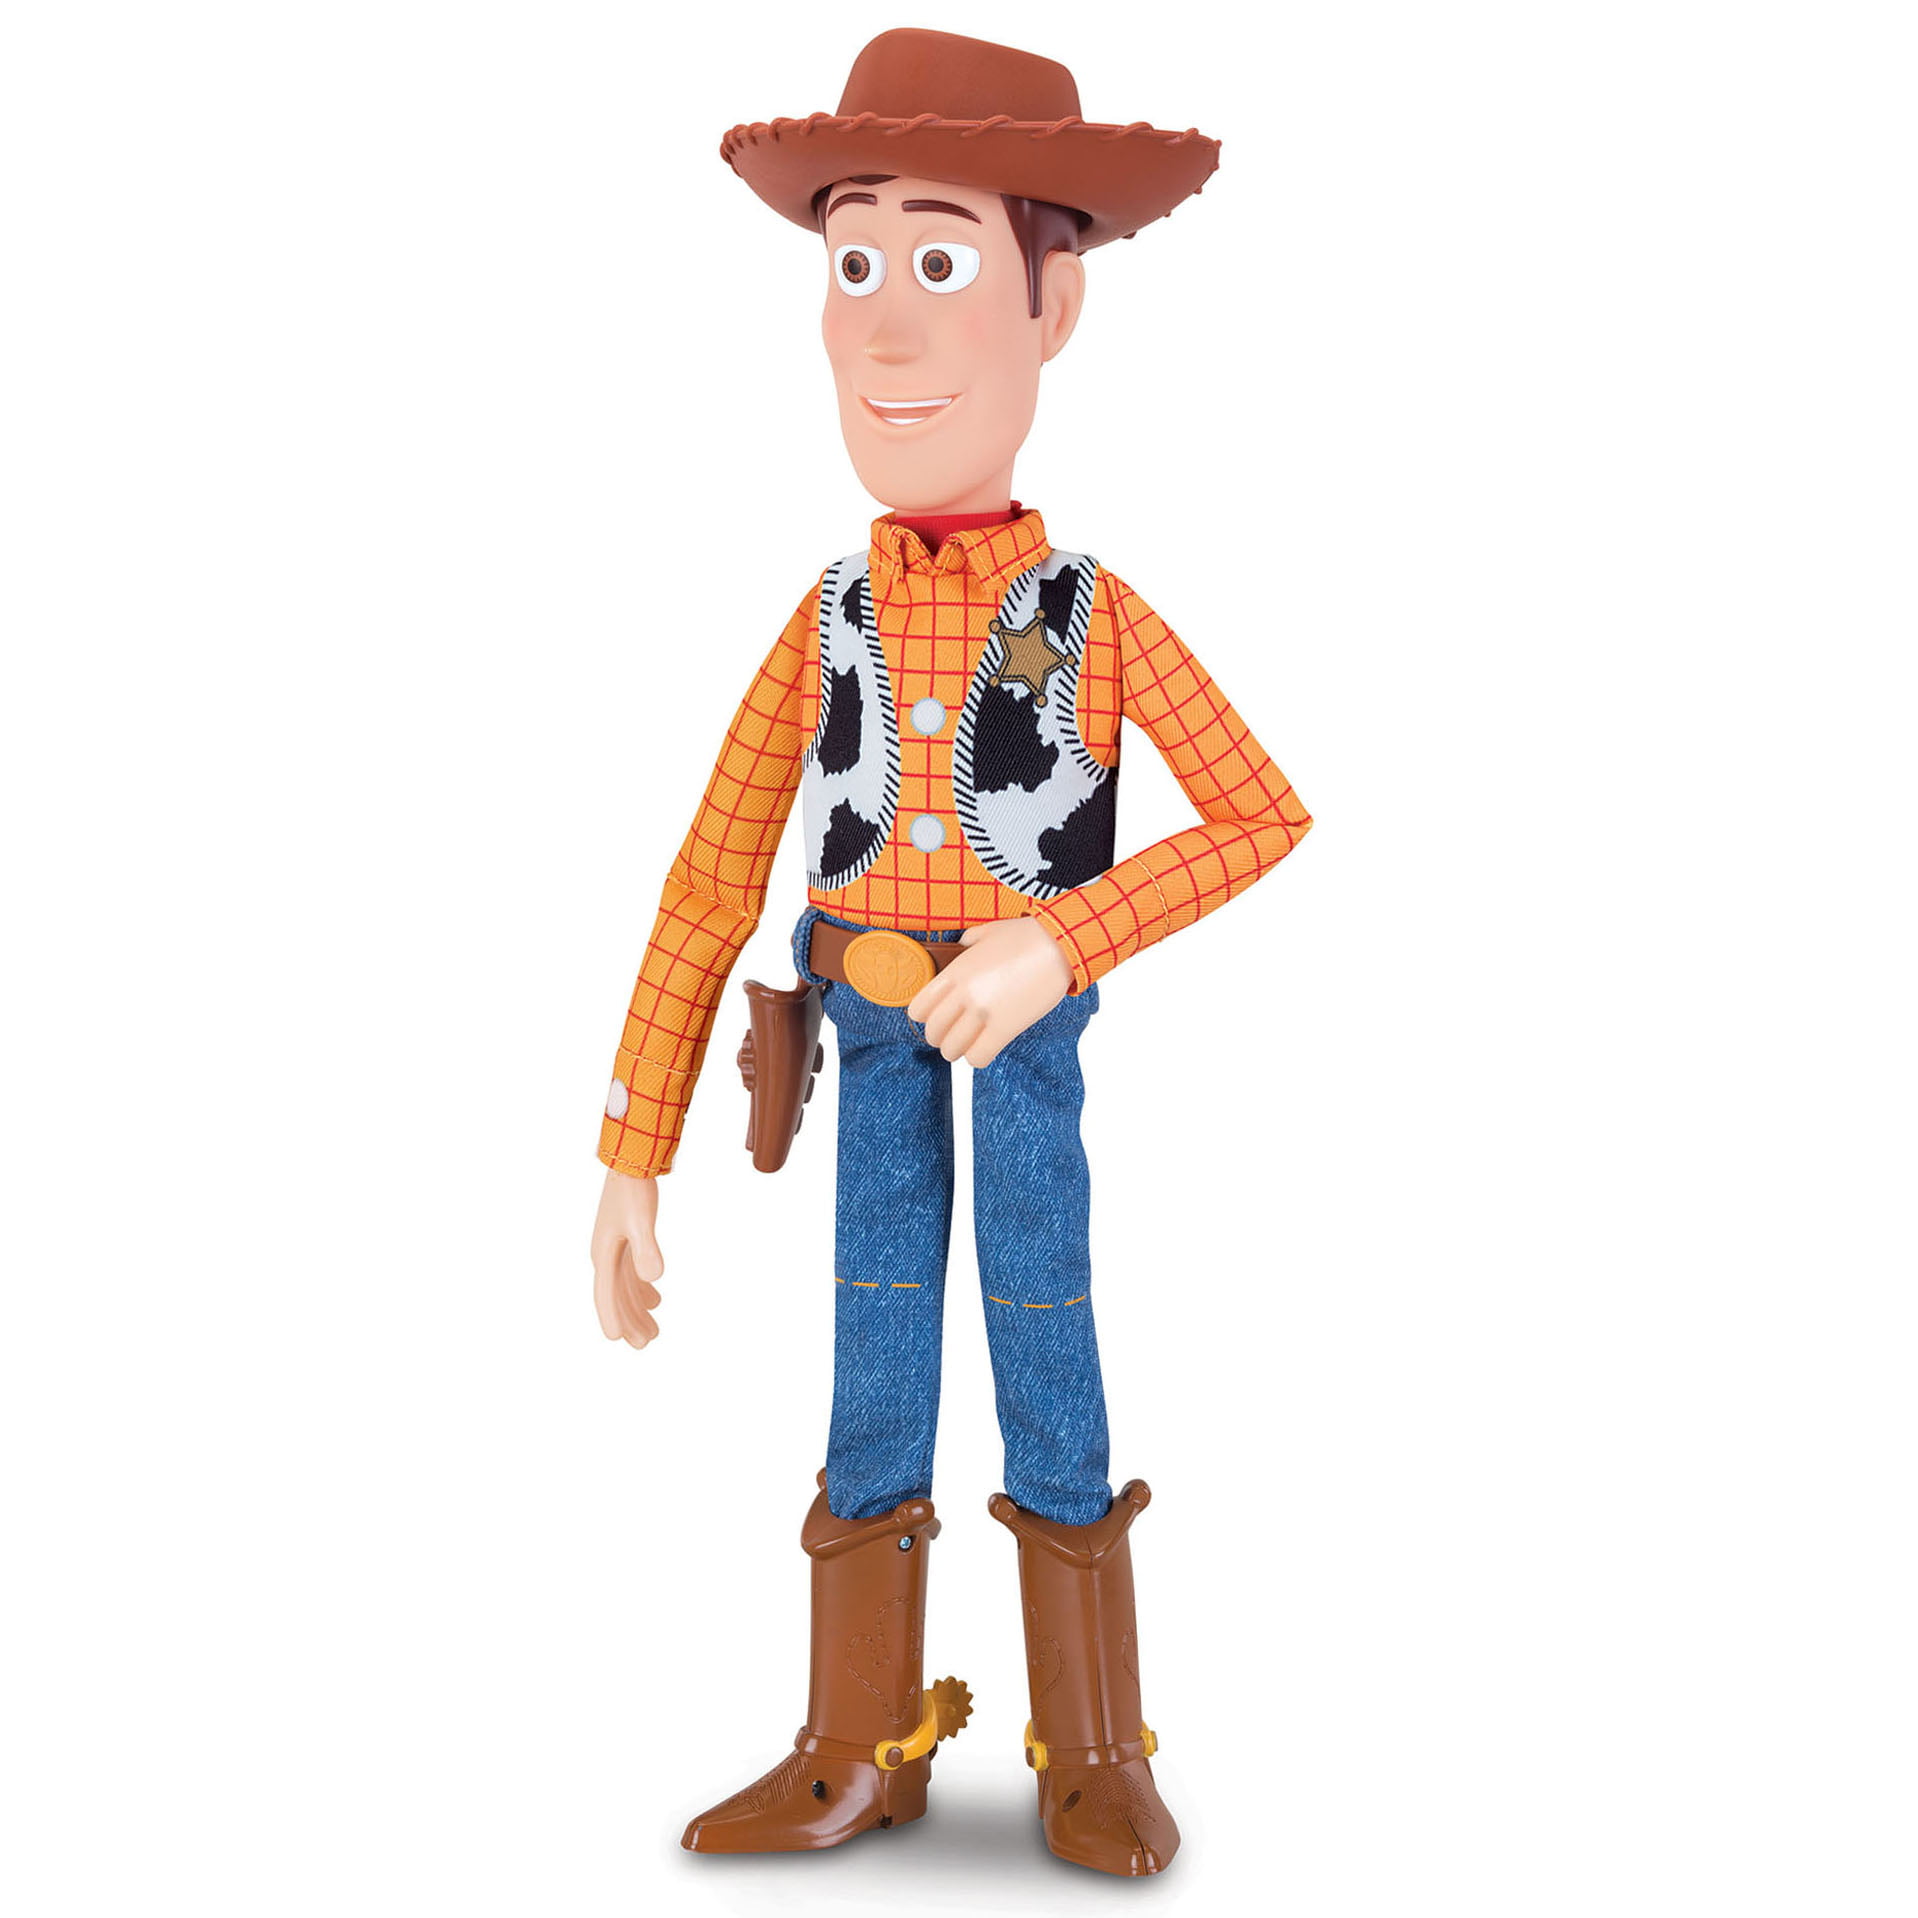 New Disney Pixar Toy Story 4 "Woody" Figure with Interactive Drop Down Action